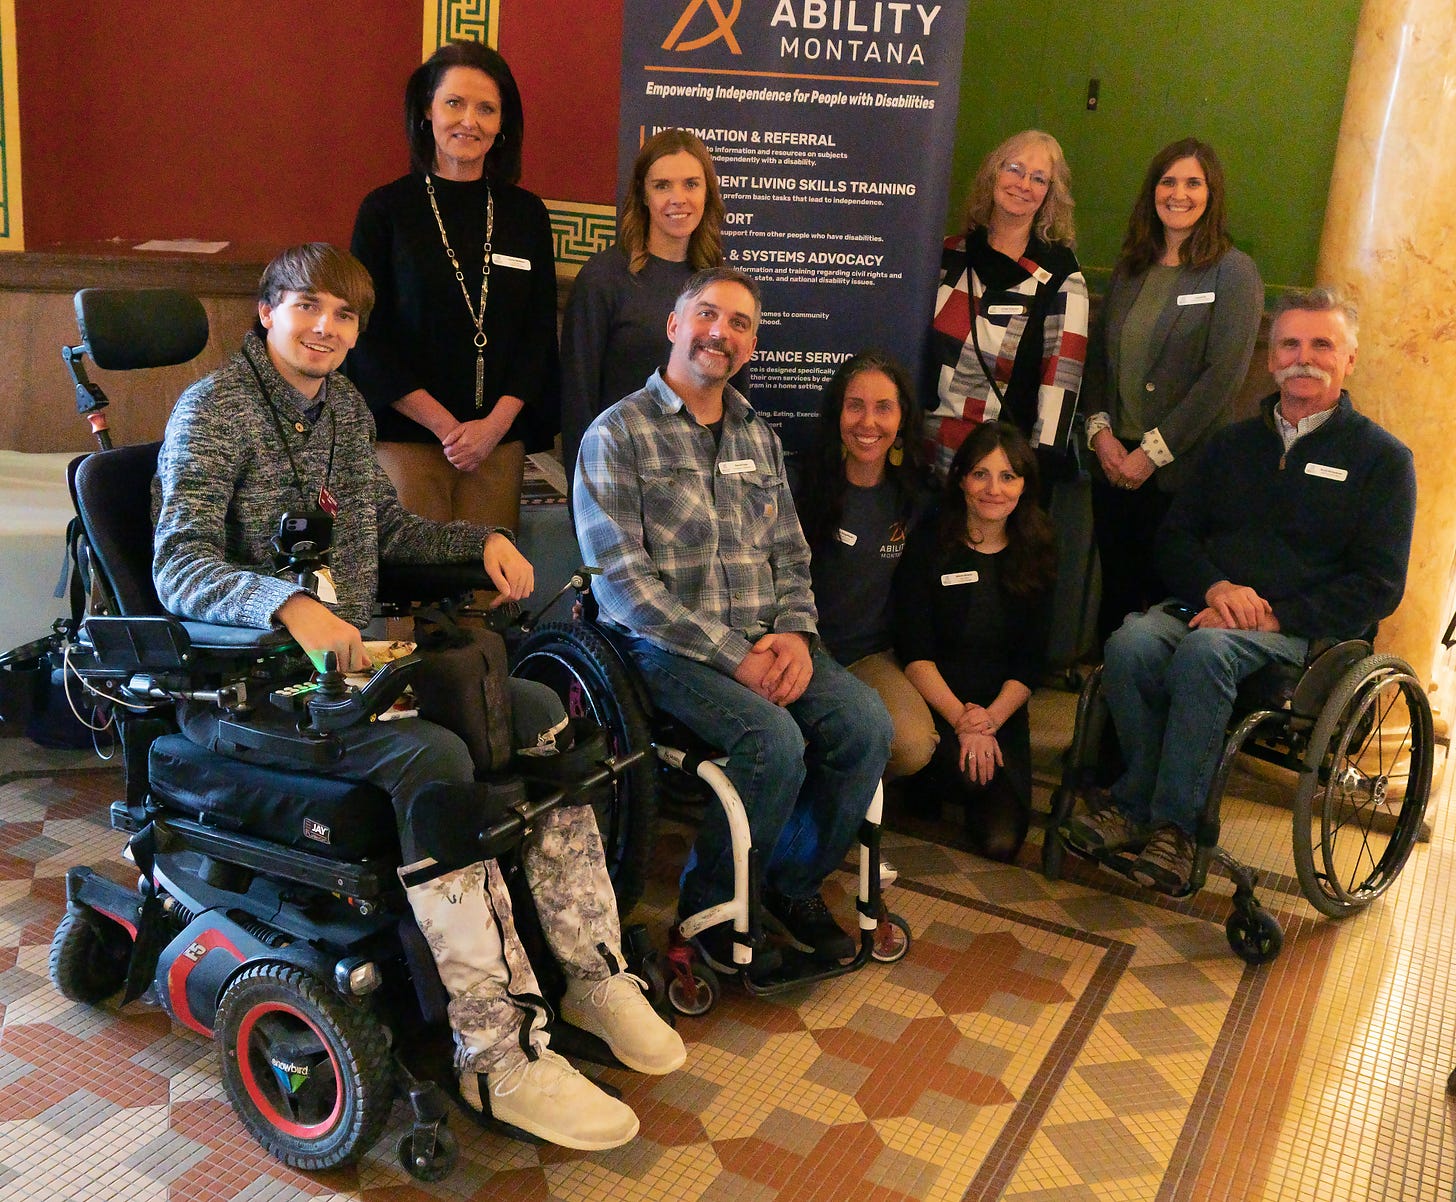 A group of smiling people pose in front of an Ability Montana banner -- three of them are in wheelchairs.